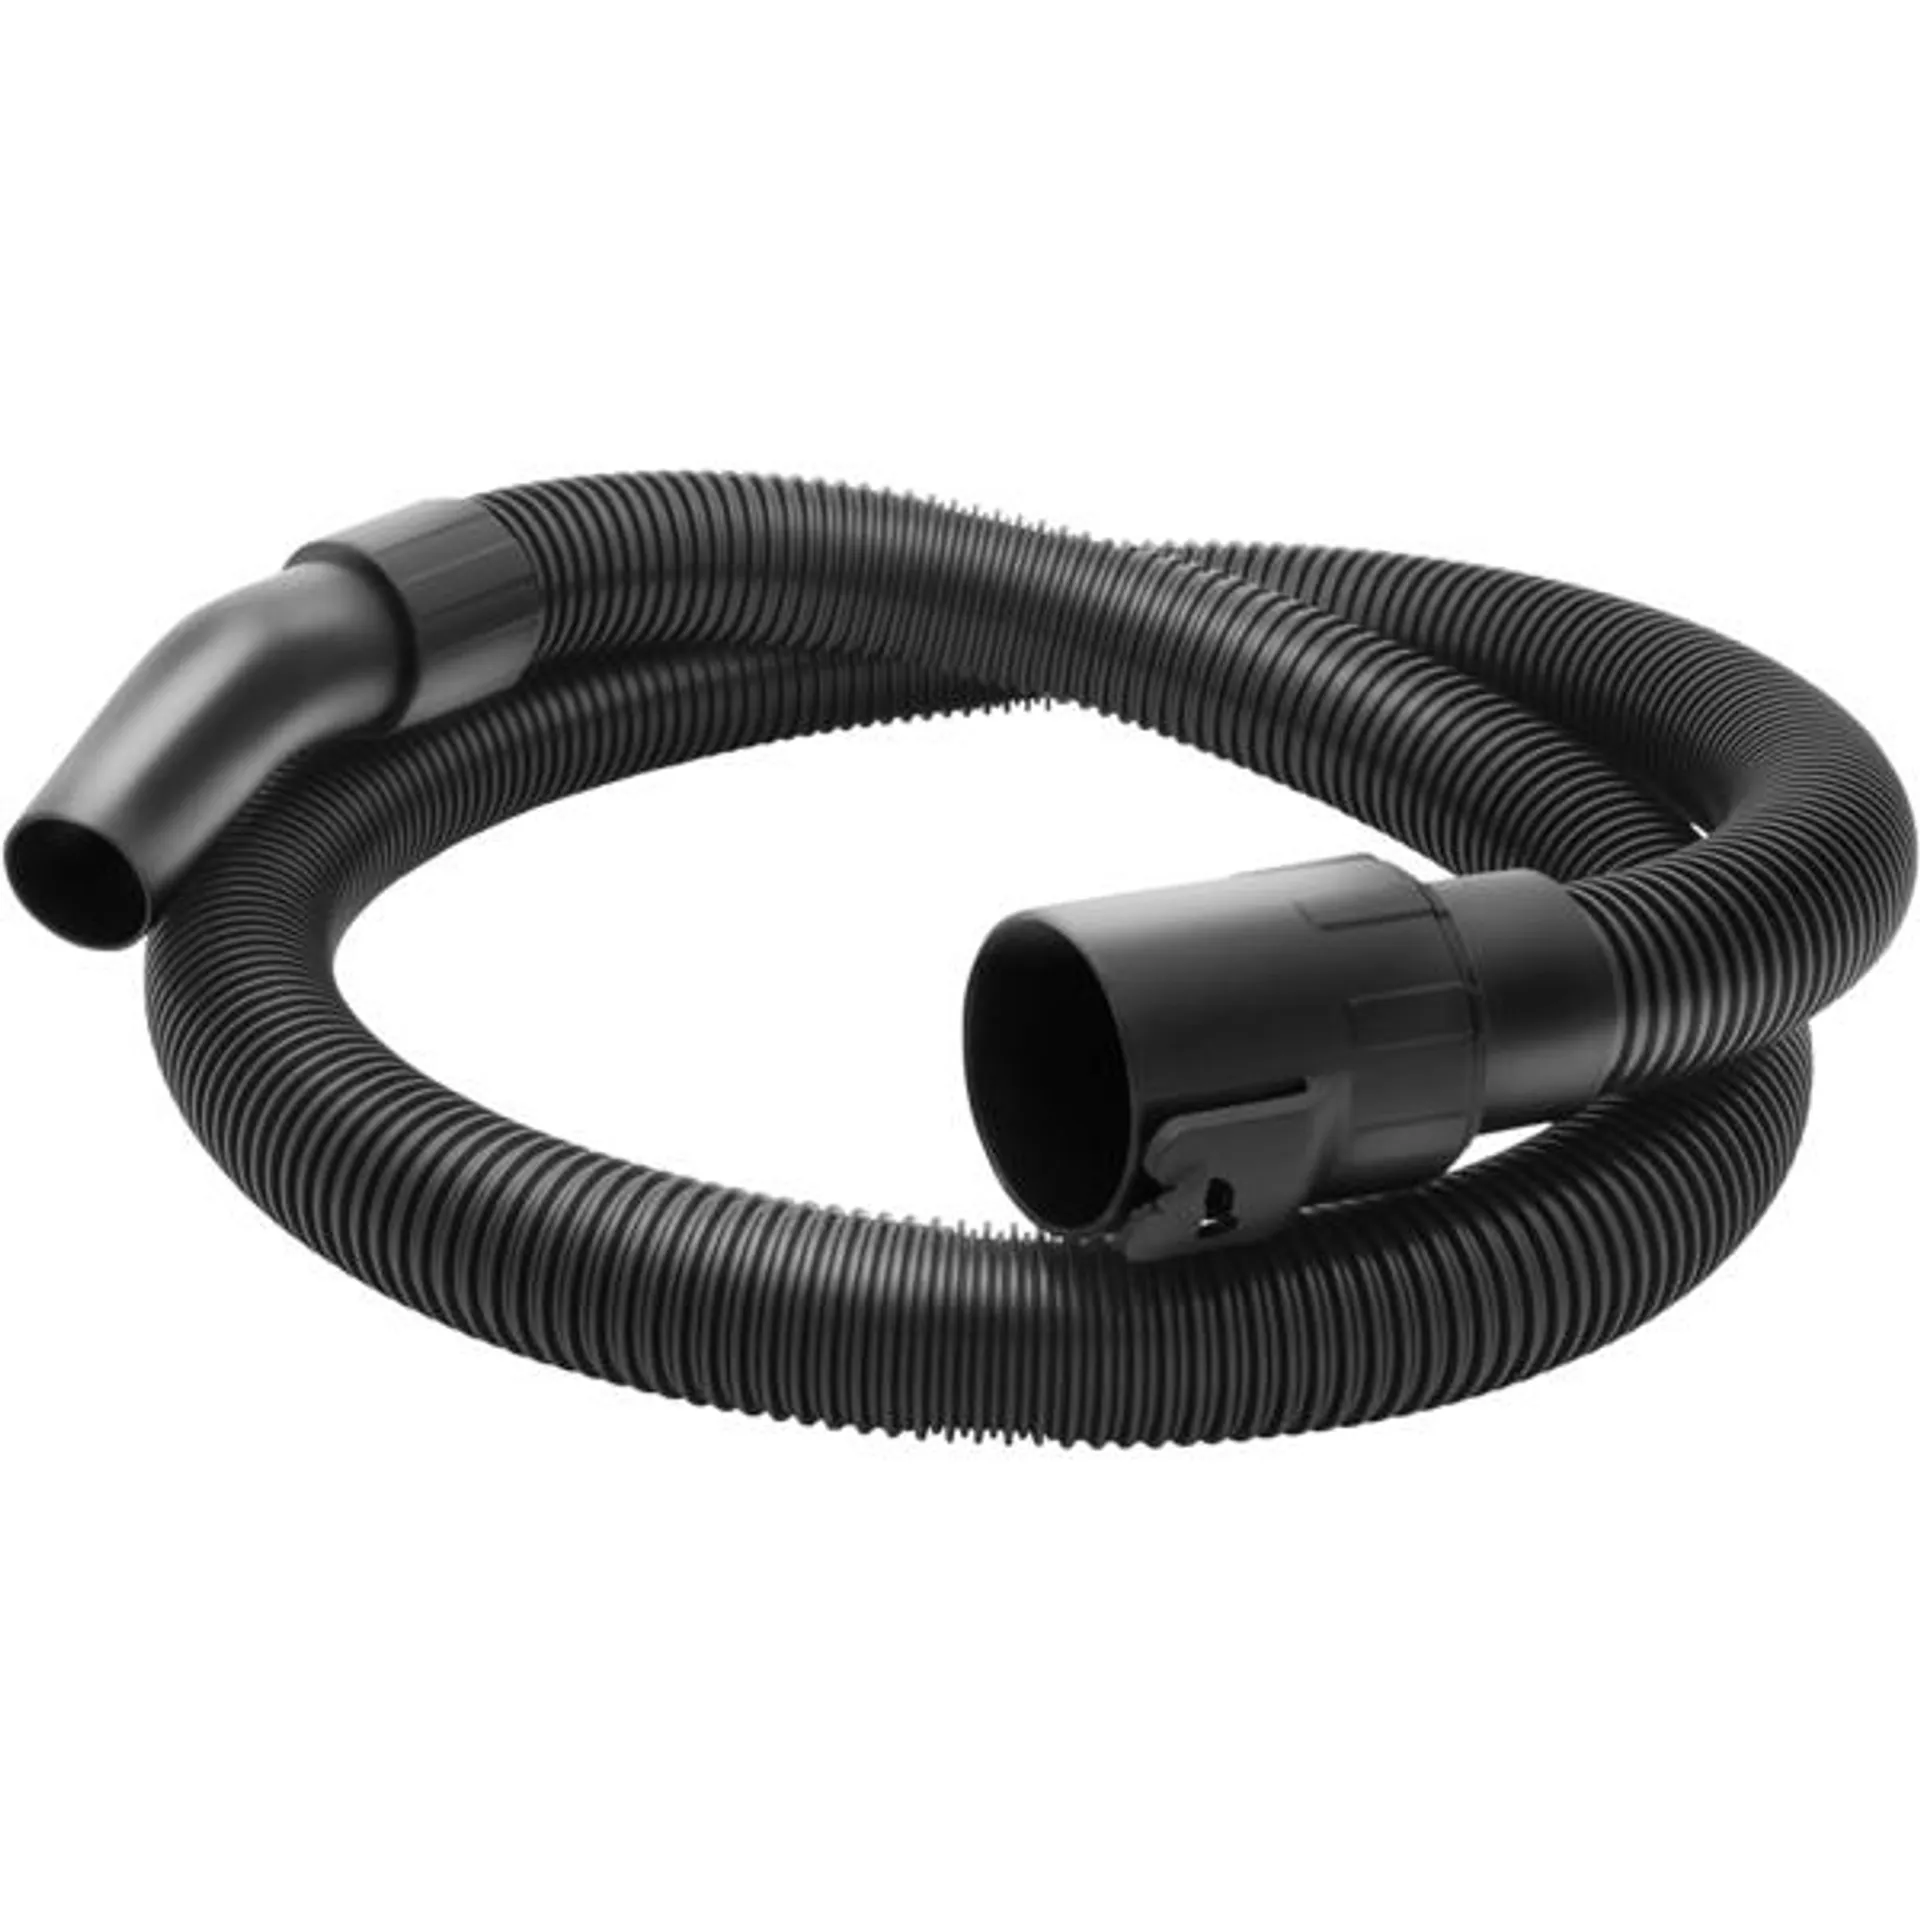 5 FT. X 1-3/8" REPLACEMENT HOSE